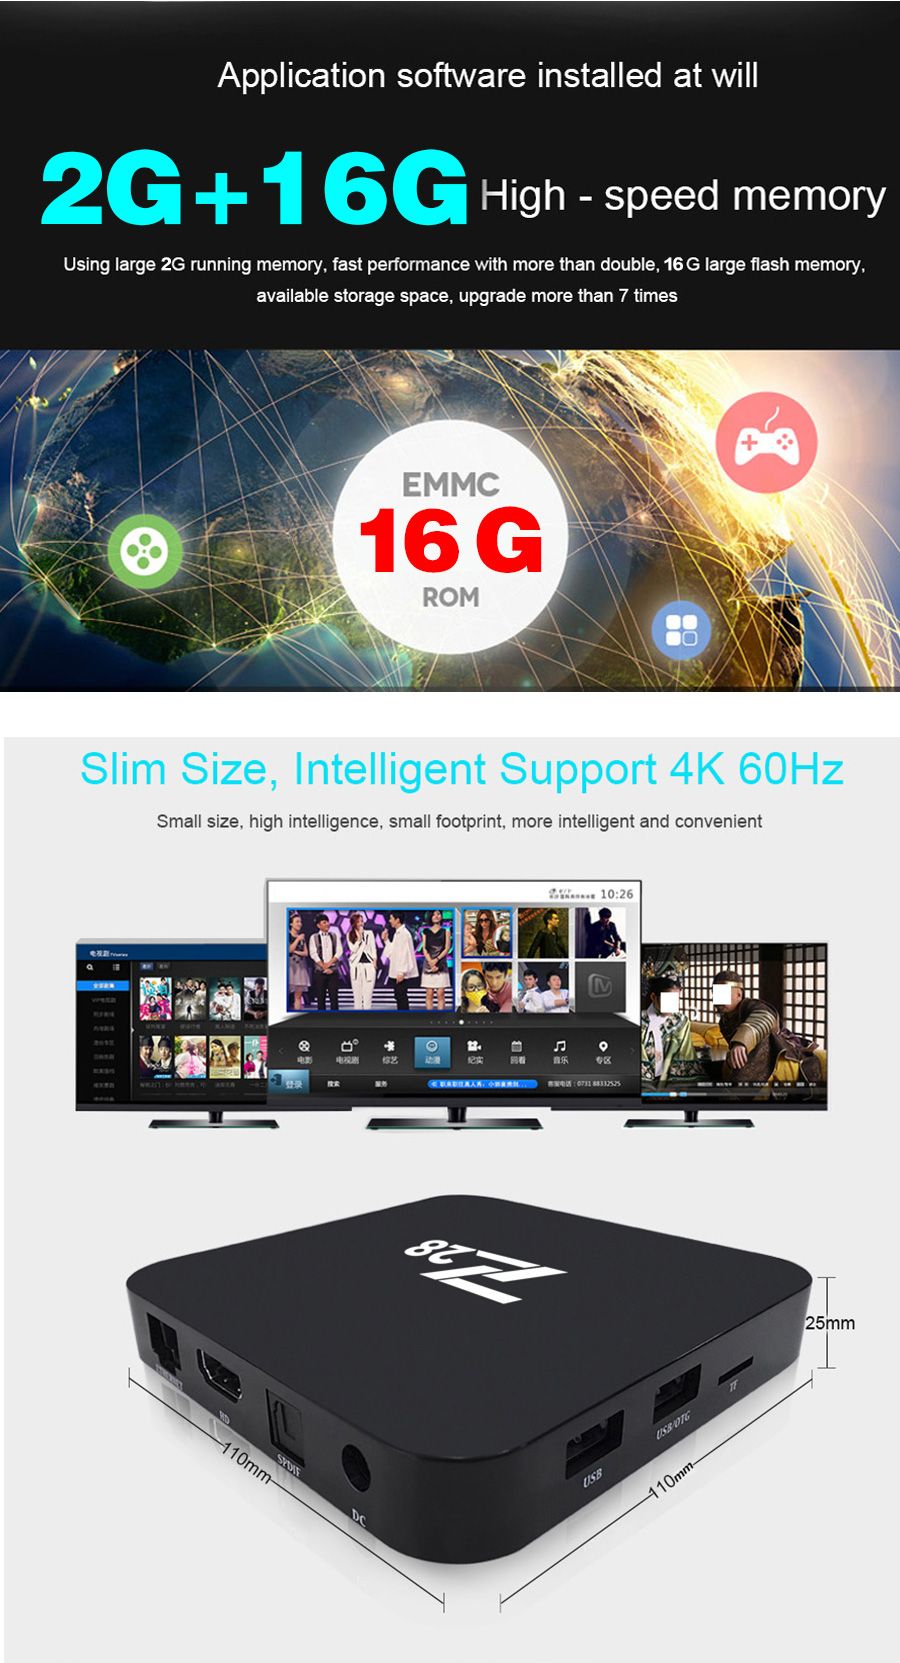 Z28-RK3328-Quad-Core-2GB-RAM-16GB-ROM-Android-71-24G-WiFi-100M-LAN-4Kx2K-60fps-H265-HEVC-Android-TV--1133993